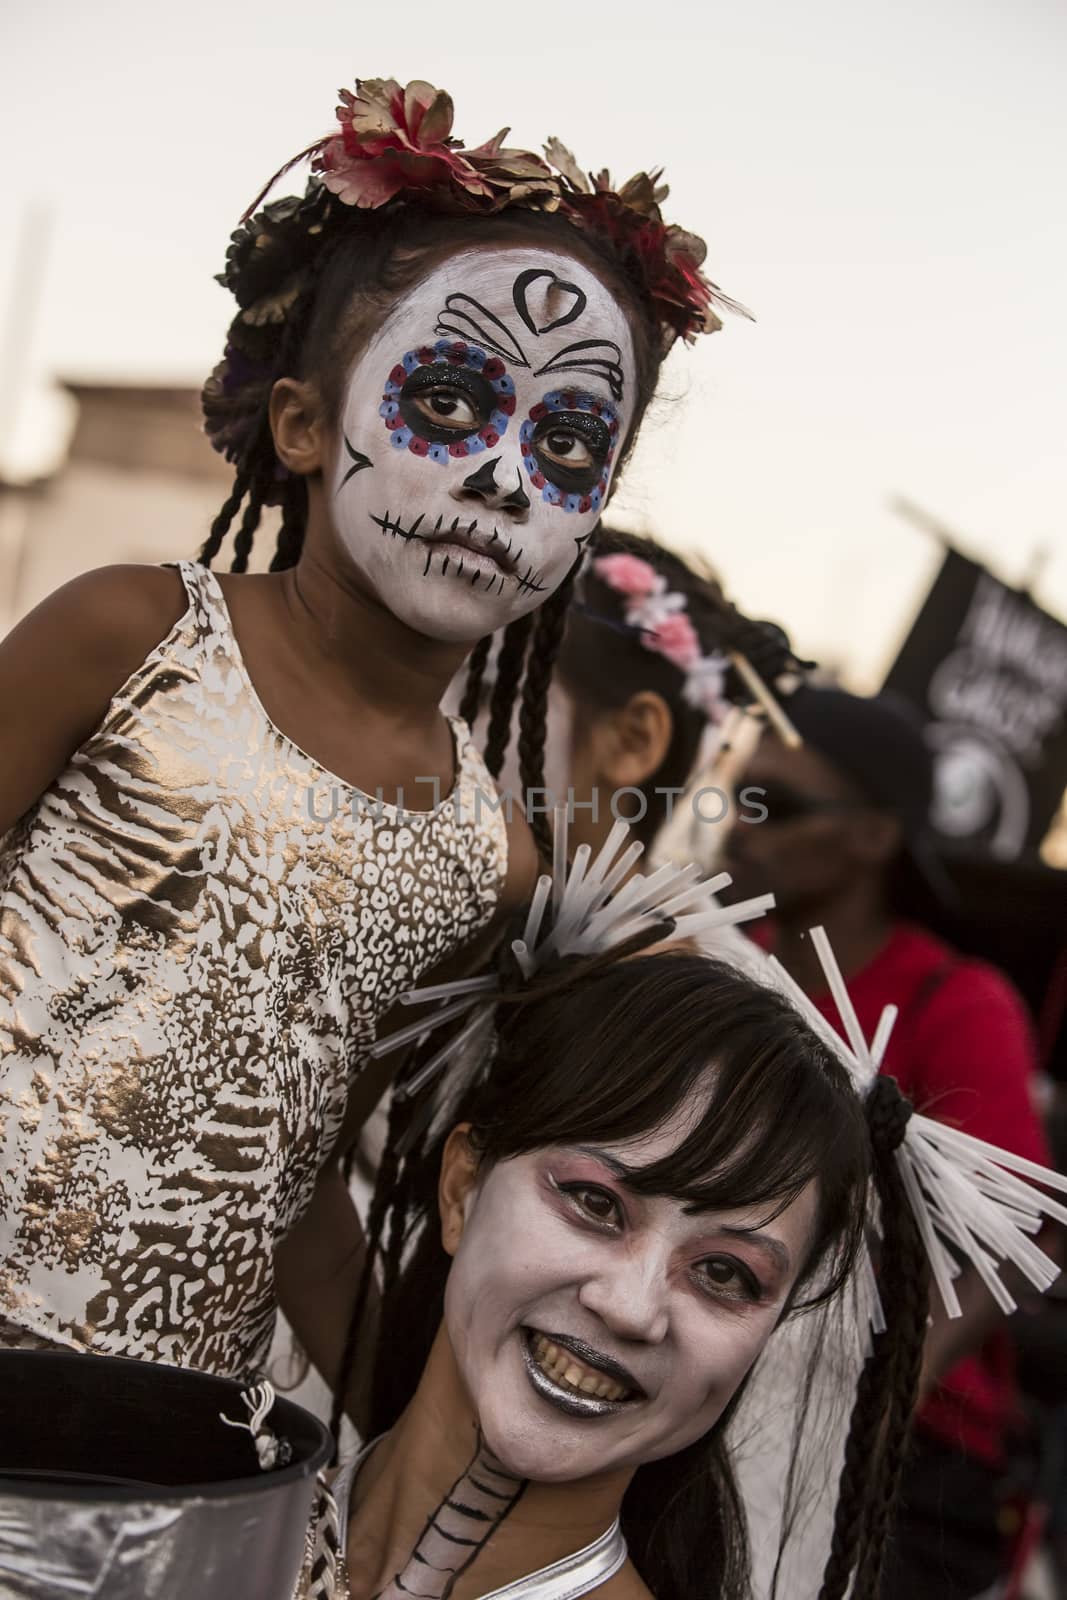 TUCSON, AZ/USA - NOVEMBER 09: Unidentified woman and young girl in facepaint at the All Souls Procession on November 09, 2014 in Tucson, AZ, USA.